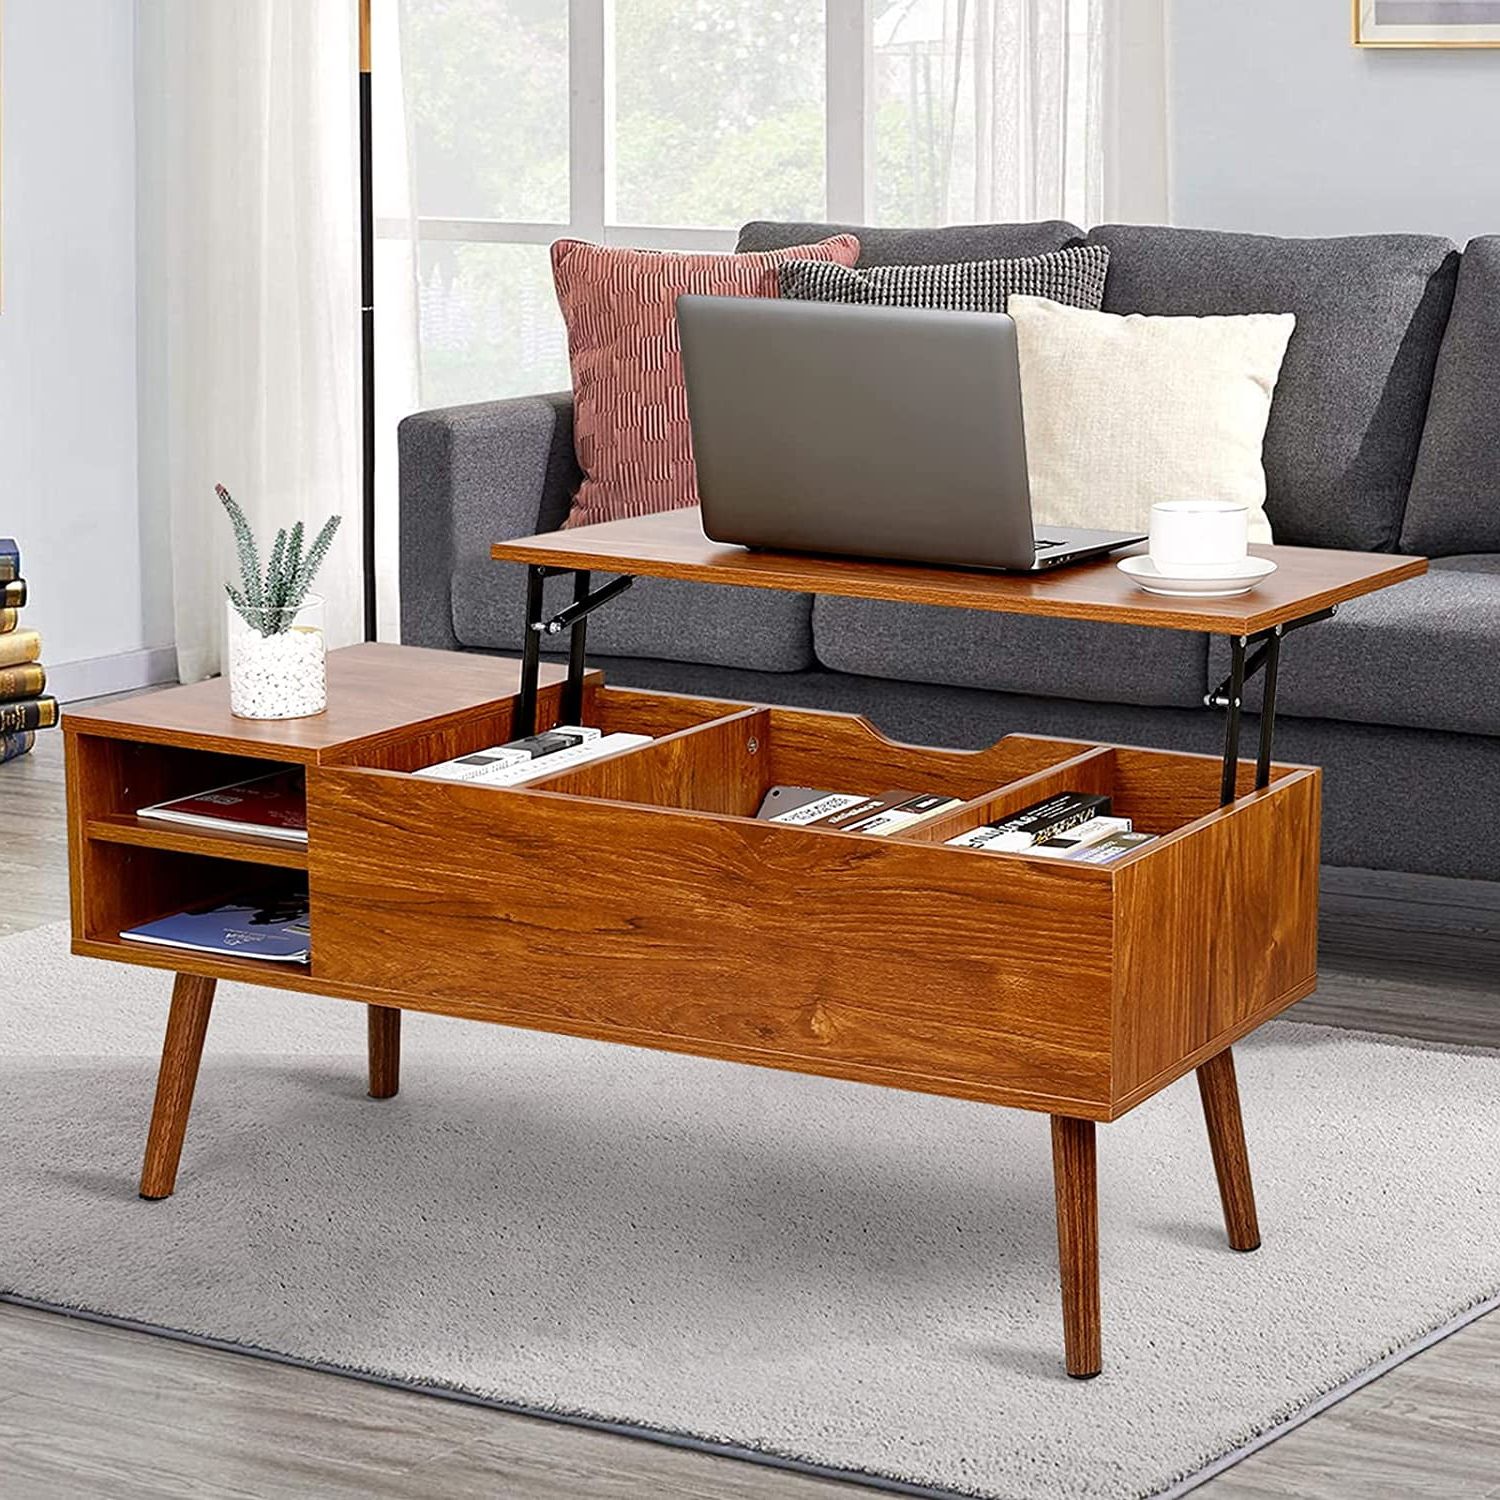 Modern Lift Top Coffee Table With Hidden Compartment Storage,adjustable With Modern Coffee Tables With Hidden Storage Compartments (Gallery 1 of 20)